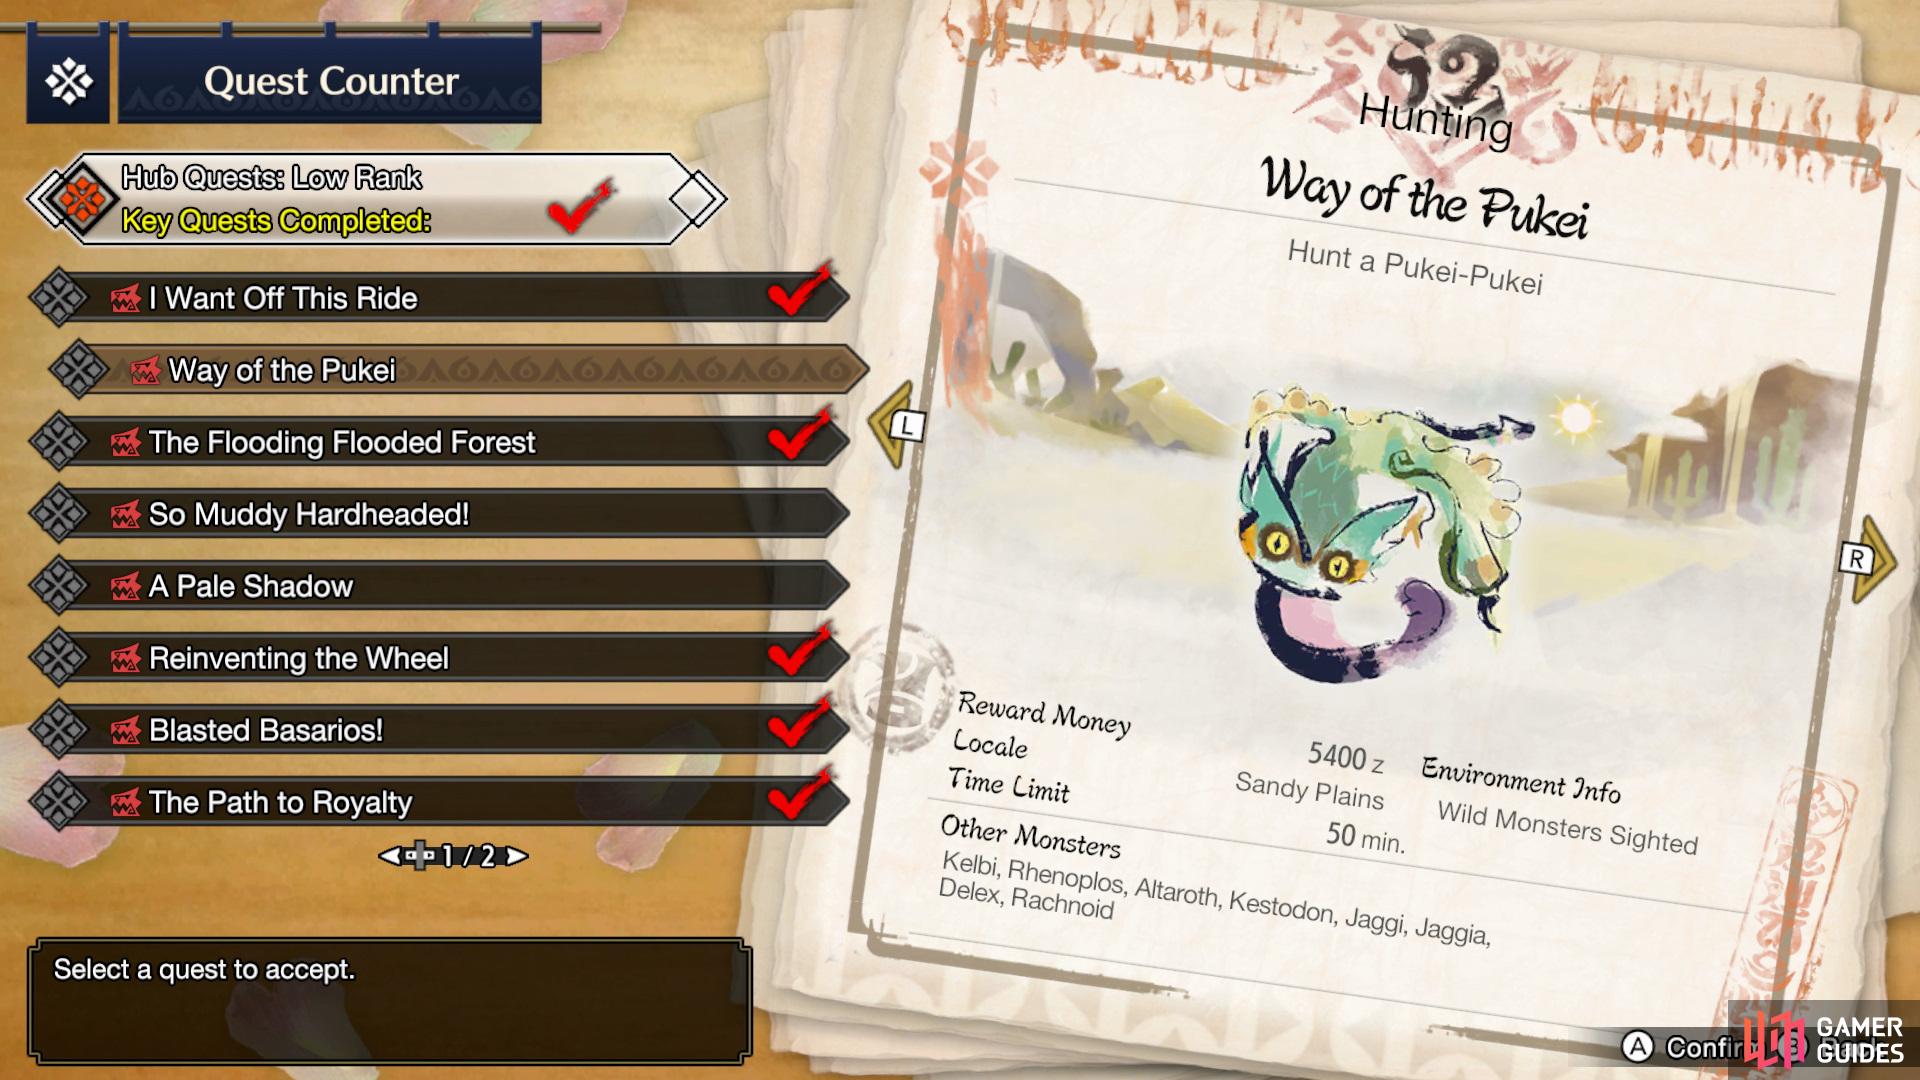 The Way of the Pukei becomes available when you reach 2* Hub Quests.